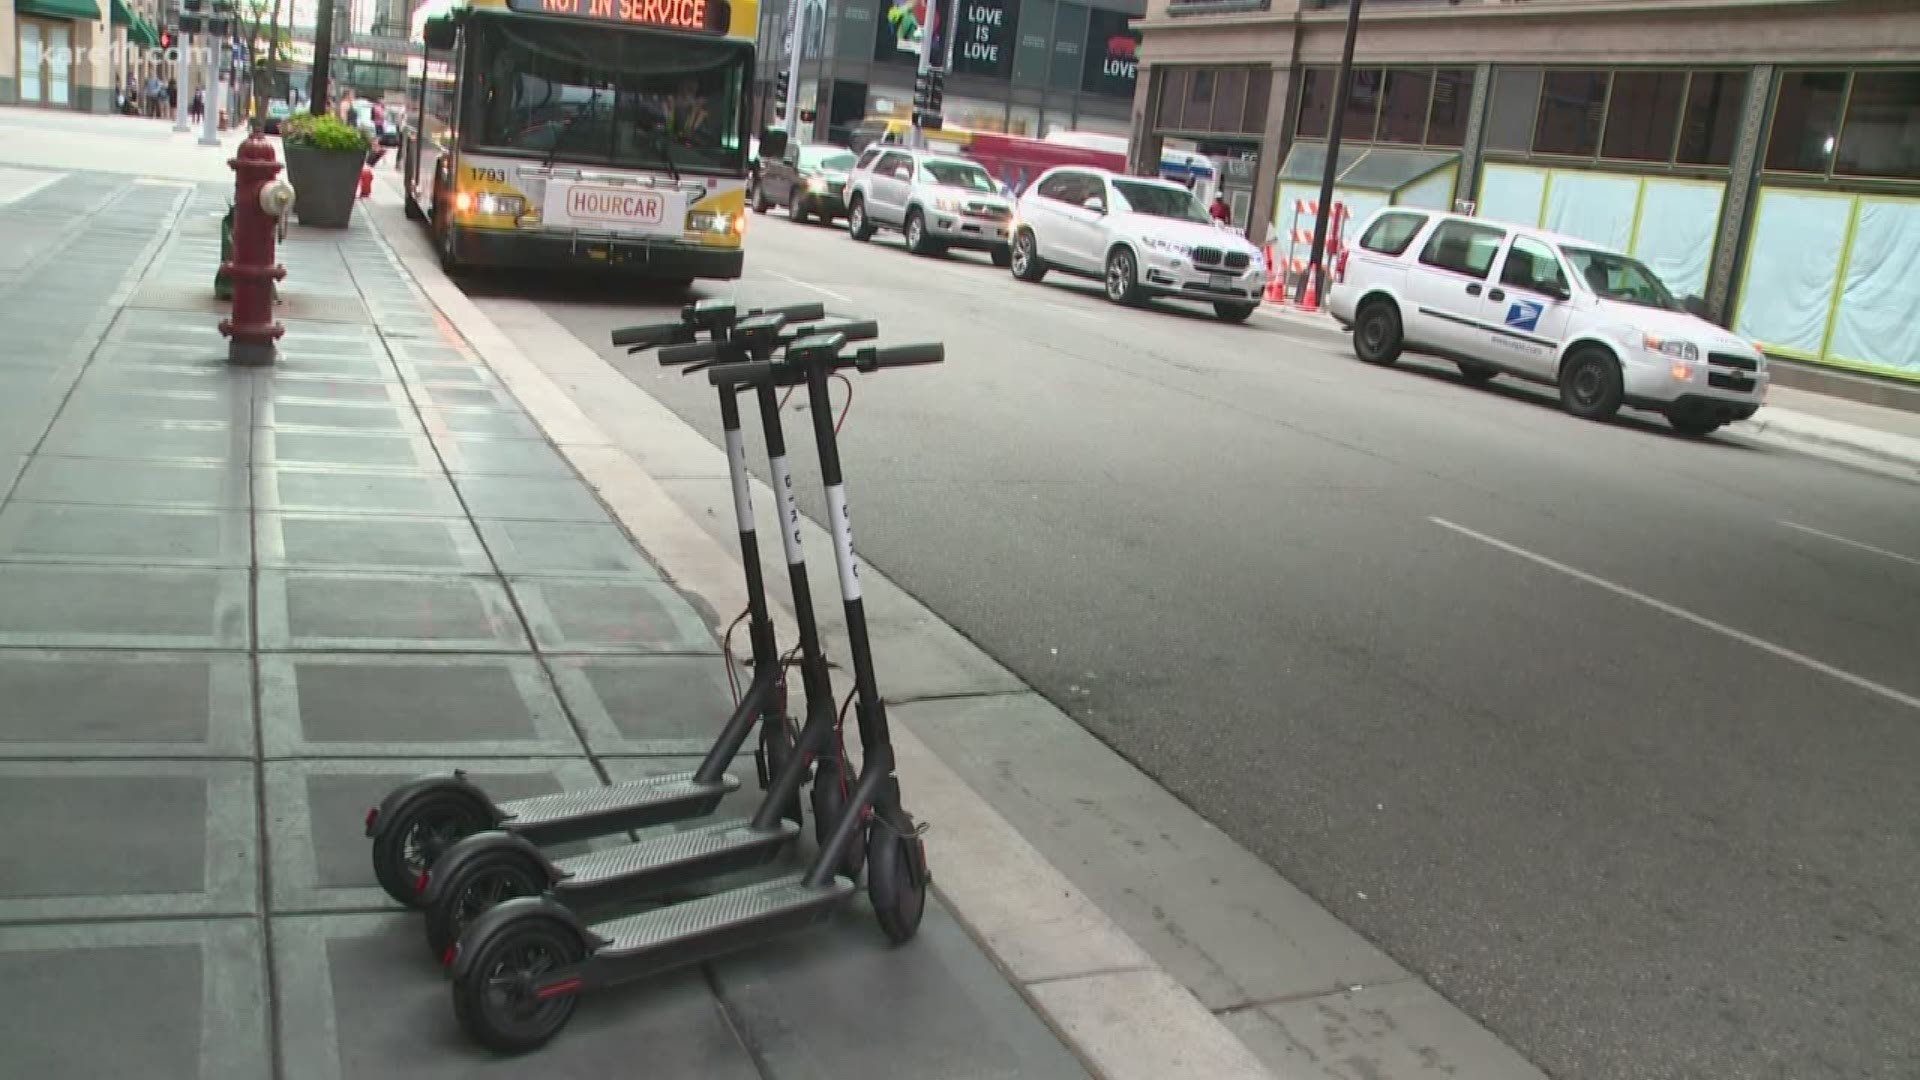 The city's Transportation and Public Works Committee approved an extension of the city's pilot program through March 2020. https://kare11.tv/2UjZFZY